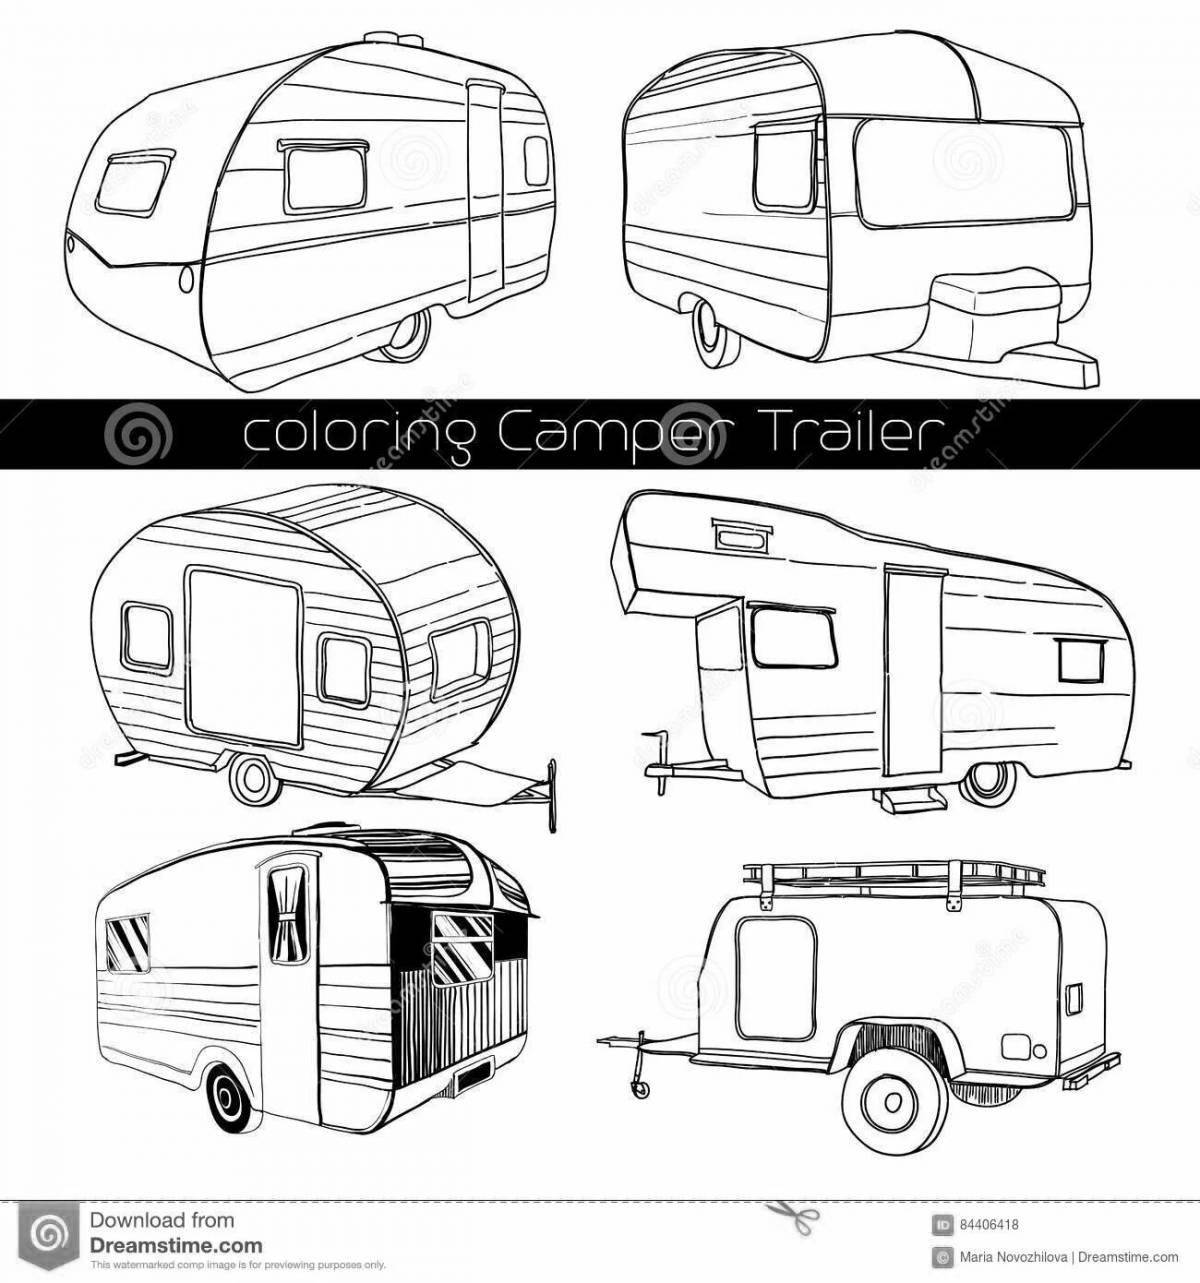 Exquisite motorhome coloring